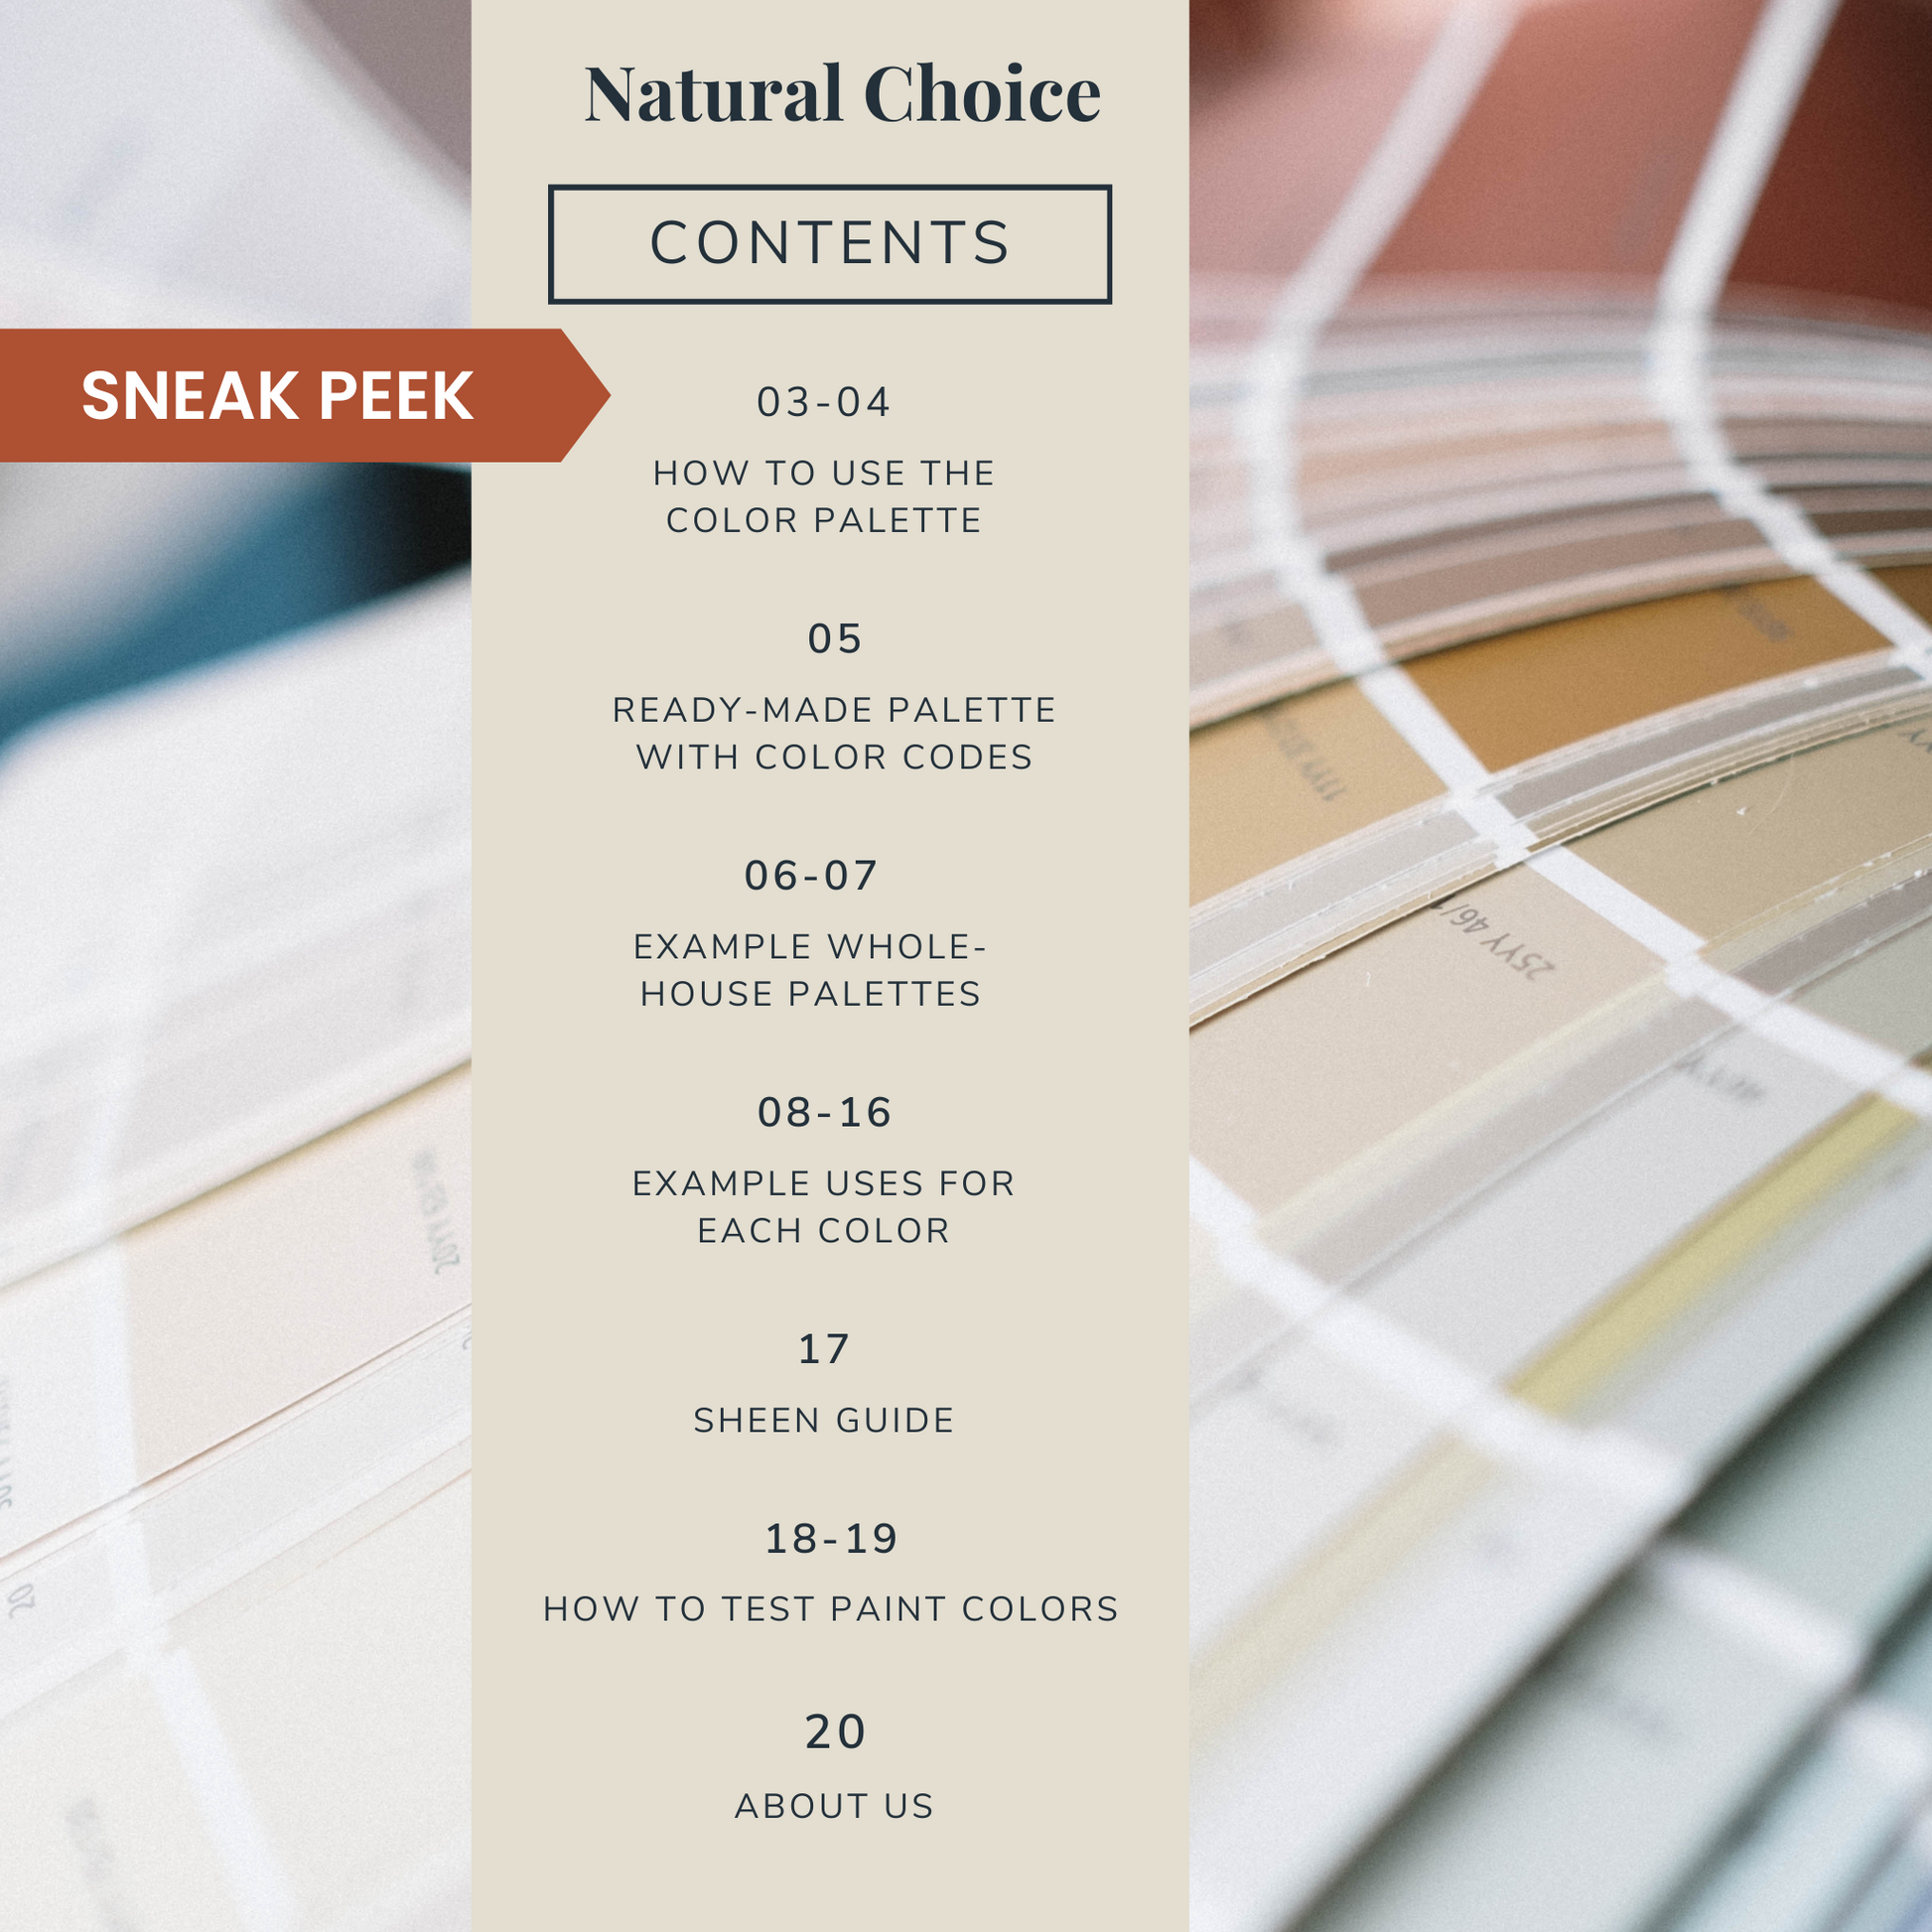 Contents list for Sherwin-Williams Natural Choice color palette